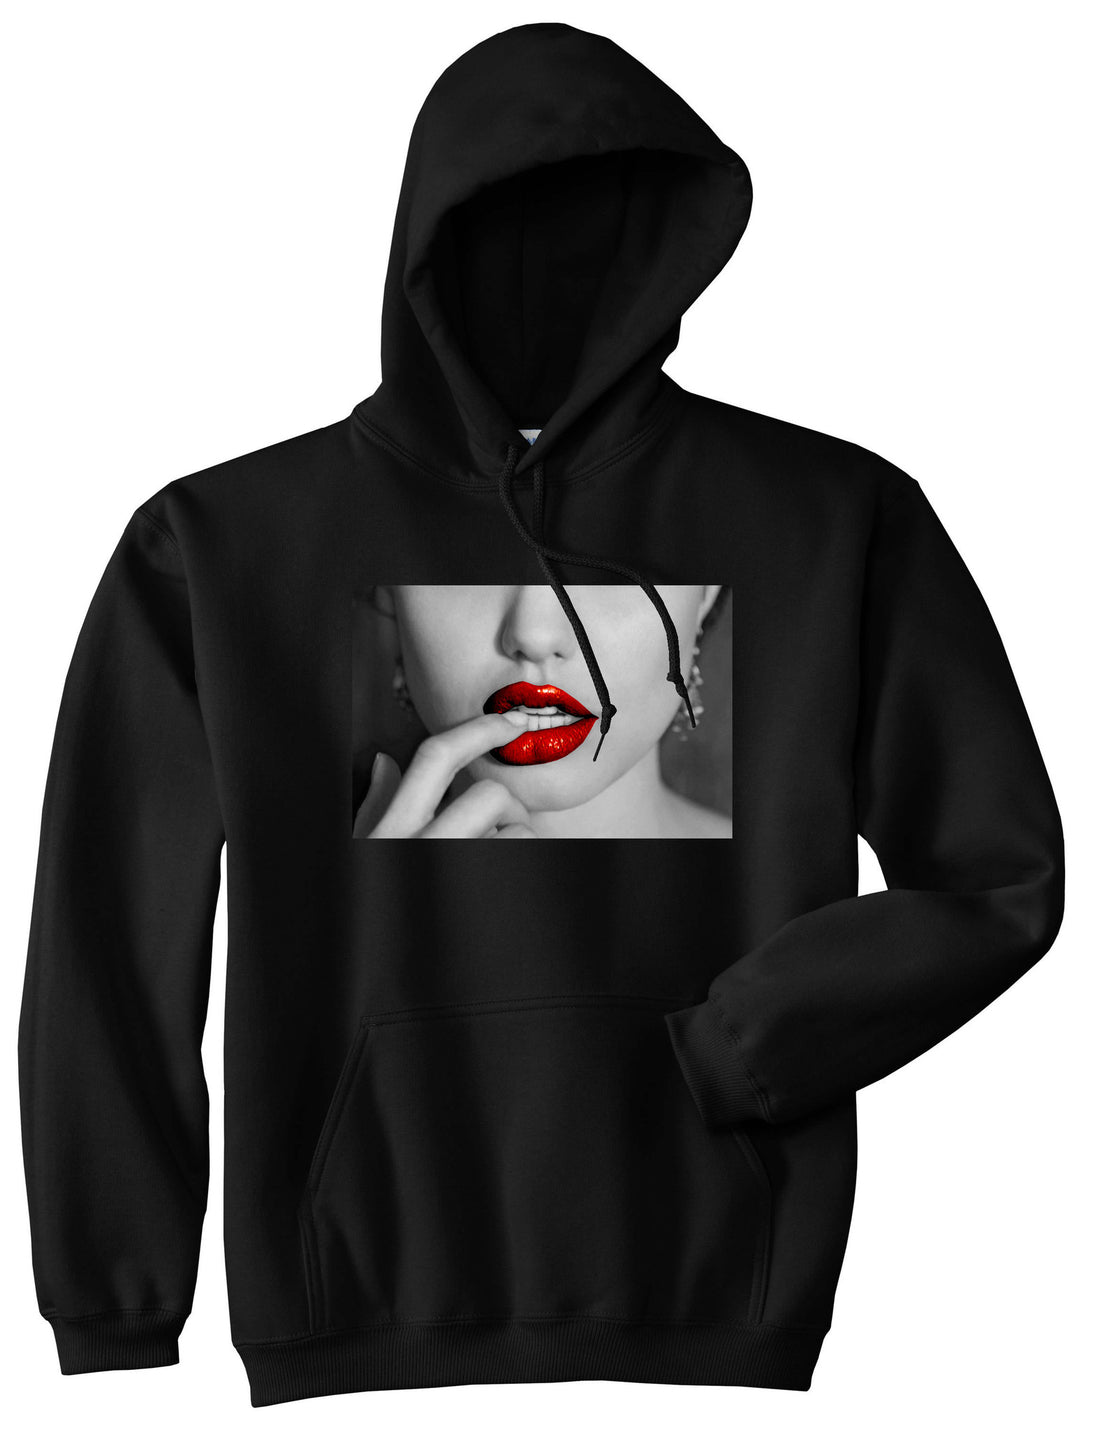  Angelina Red by Kings Of NY Lips Jolie Sexy Hot Picture Boys Kids Pullover Hoodie Hoody In Black by Kings Of NY